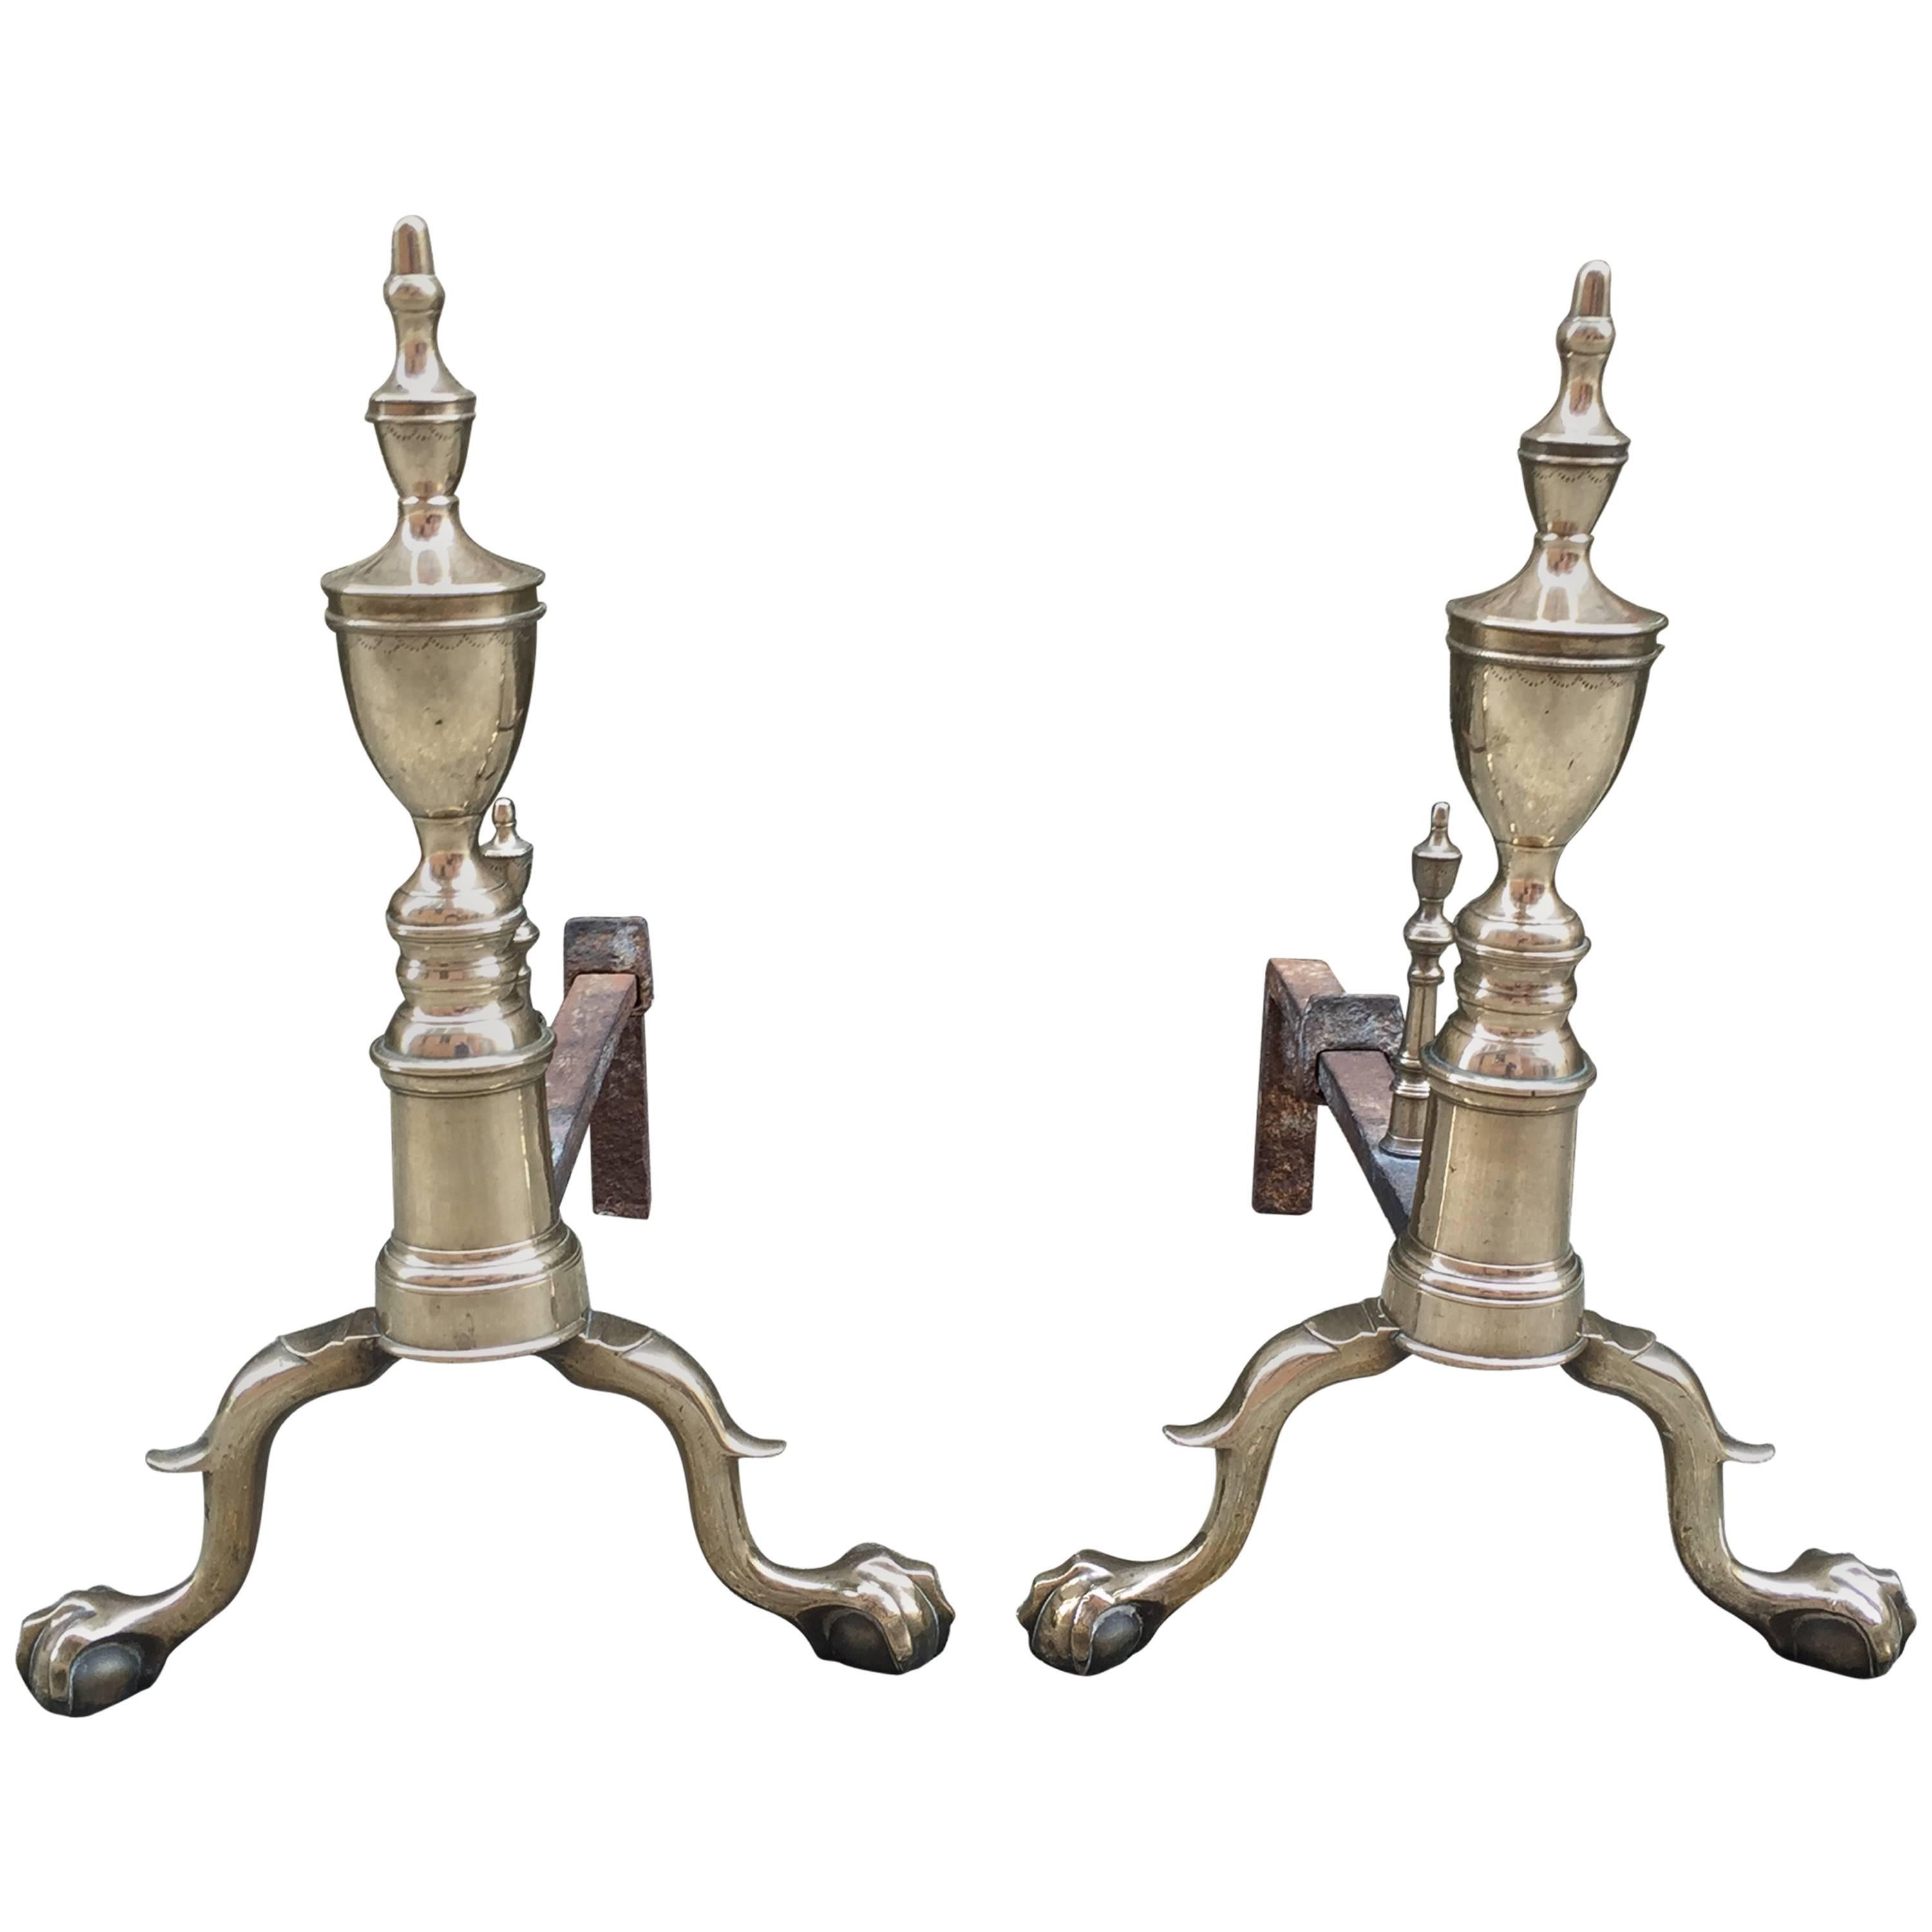 Pair of American Paw Foot Andirons from the Late 18th Century